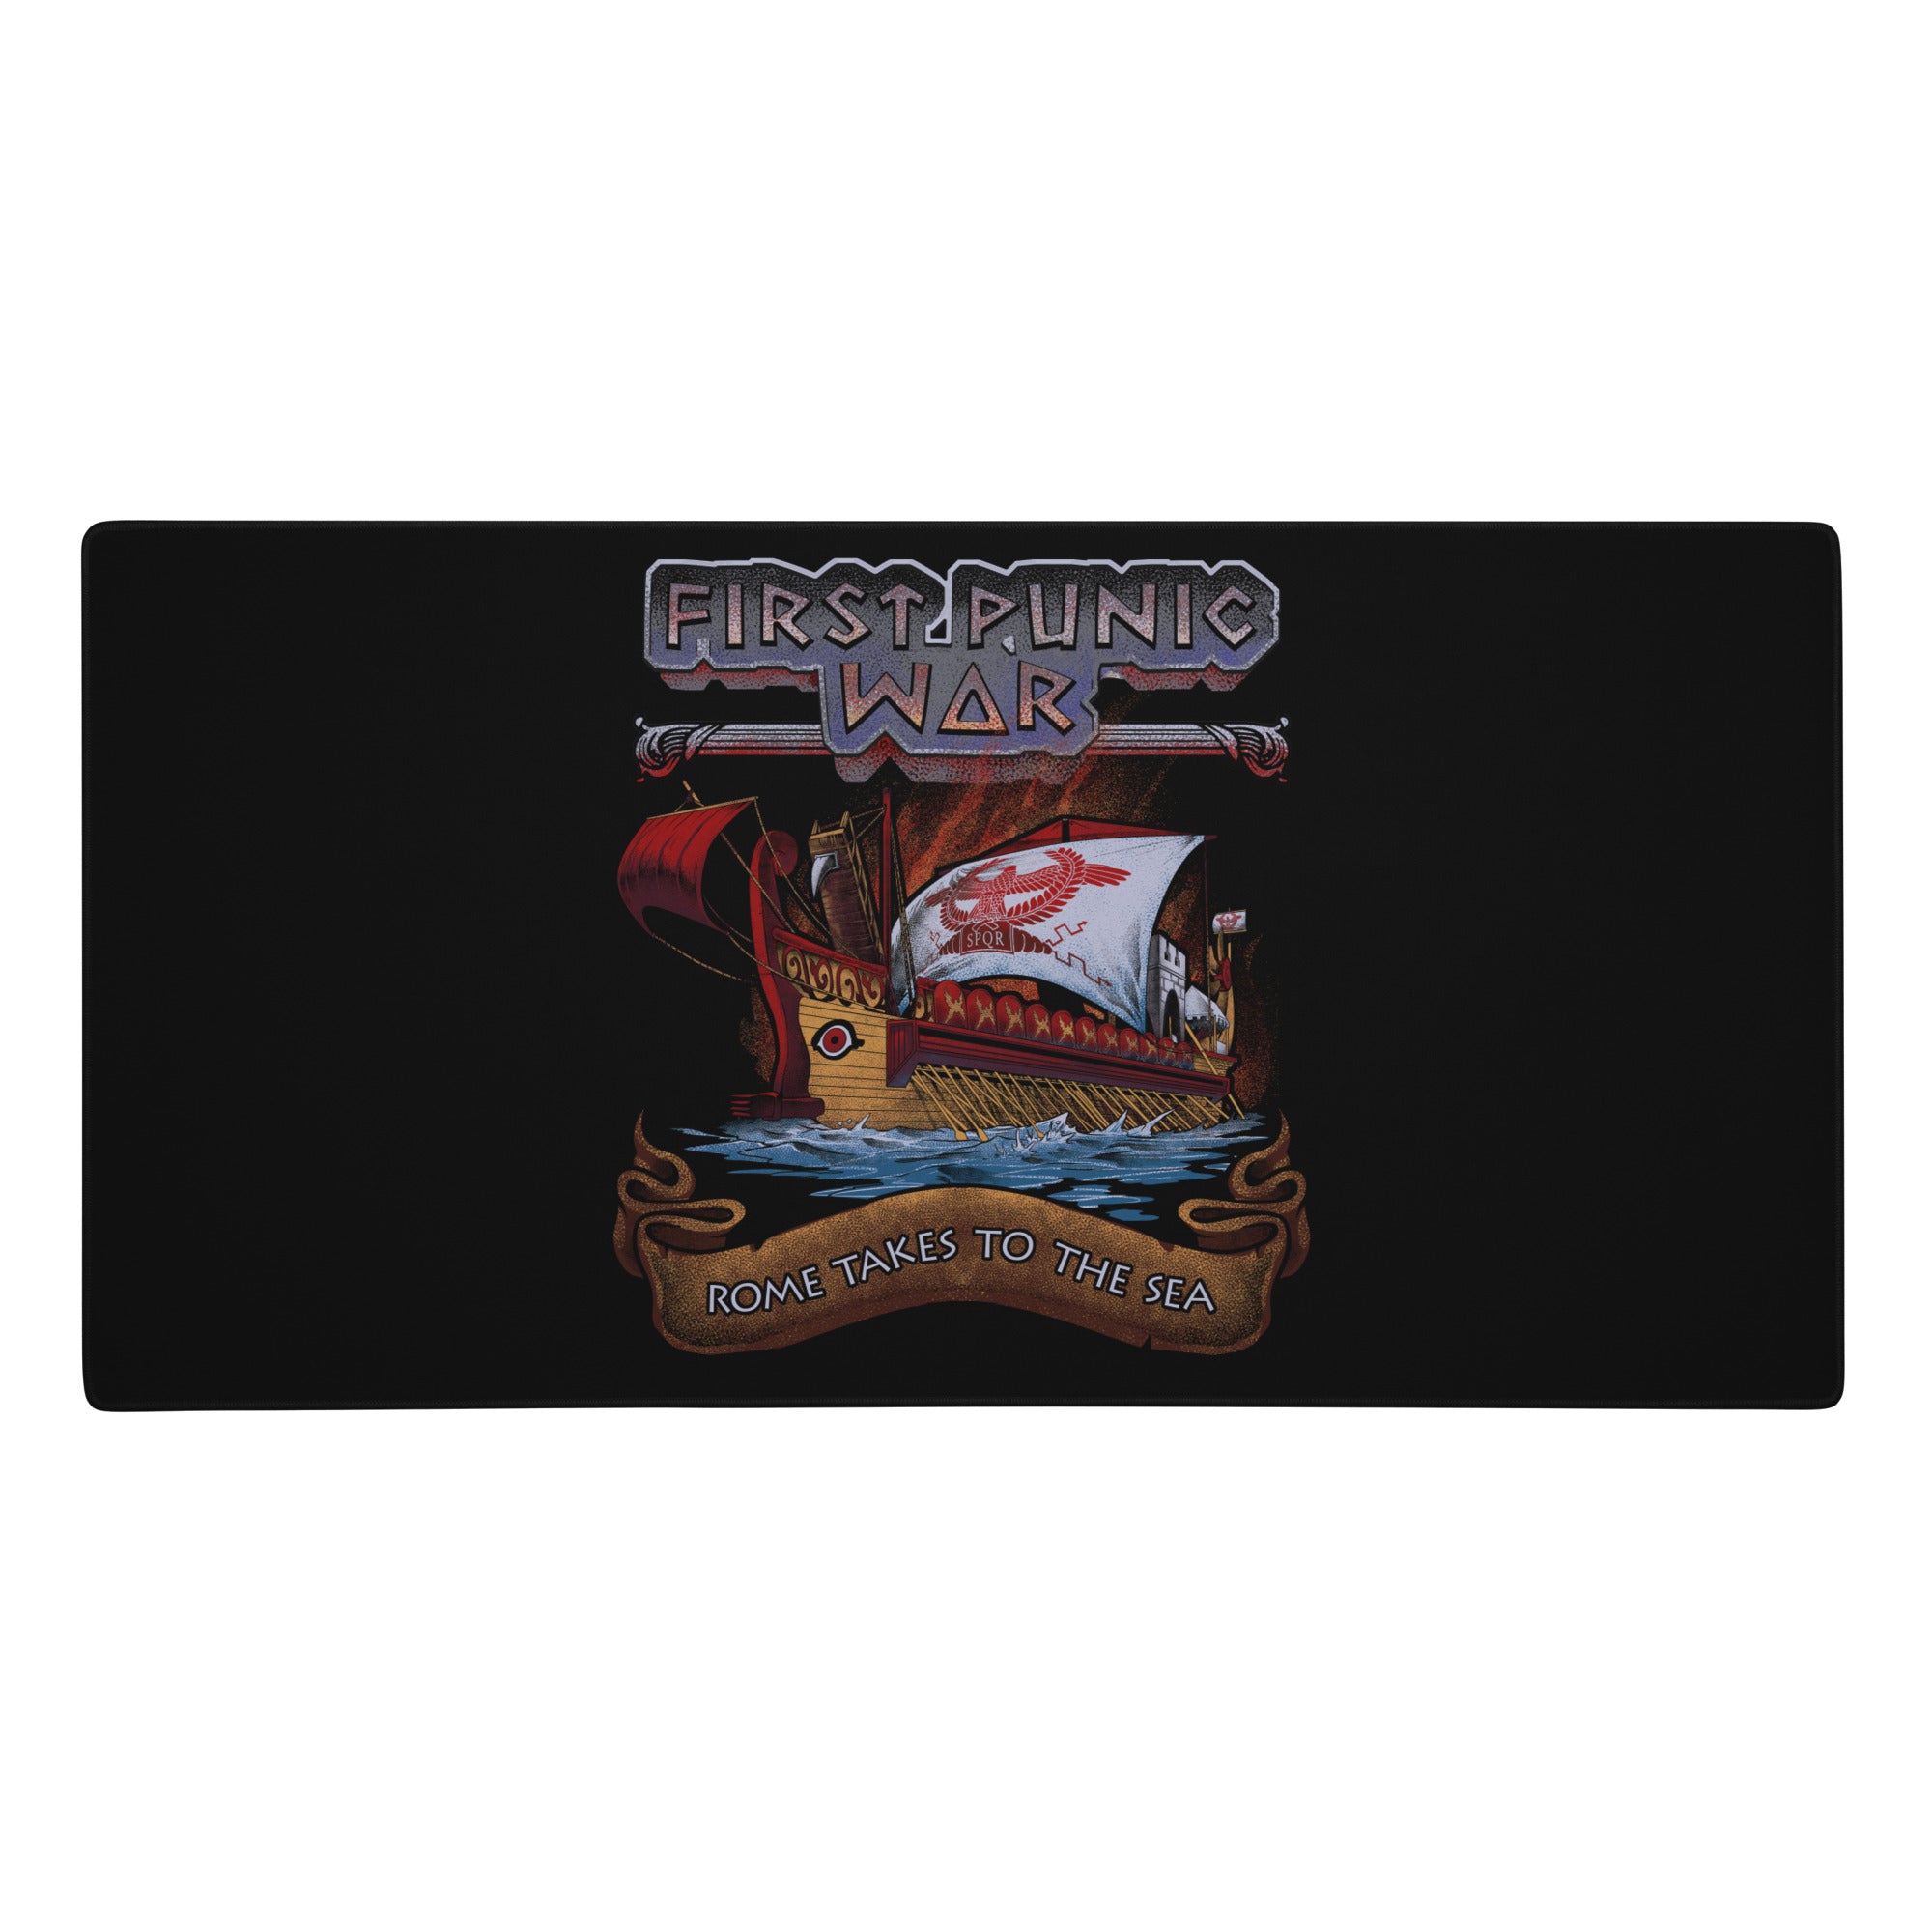 First Punic War - Rome Takes To The Sea - Naval History Gaming Mouse Pad